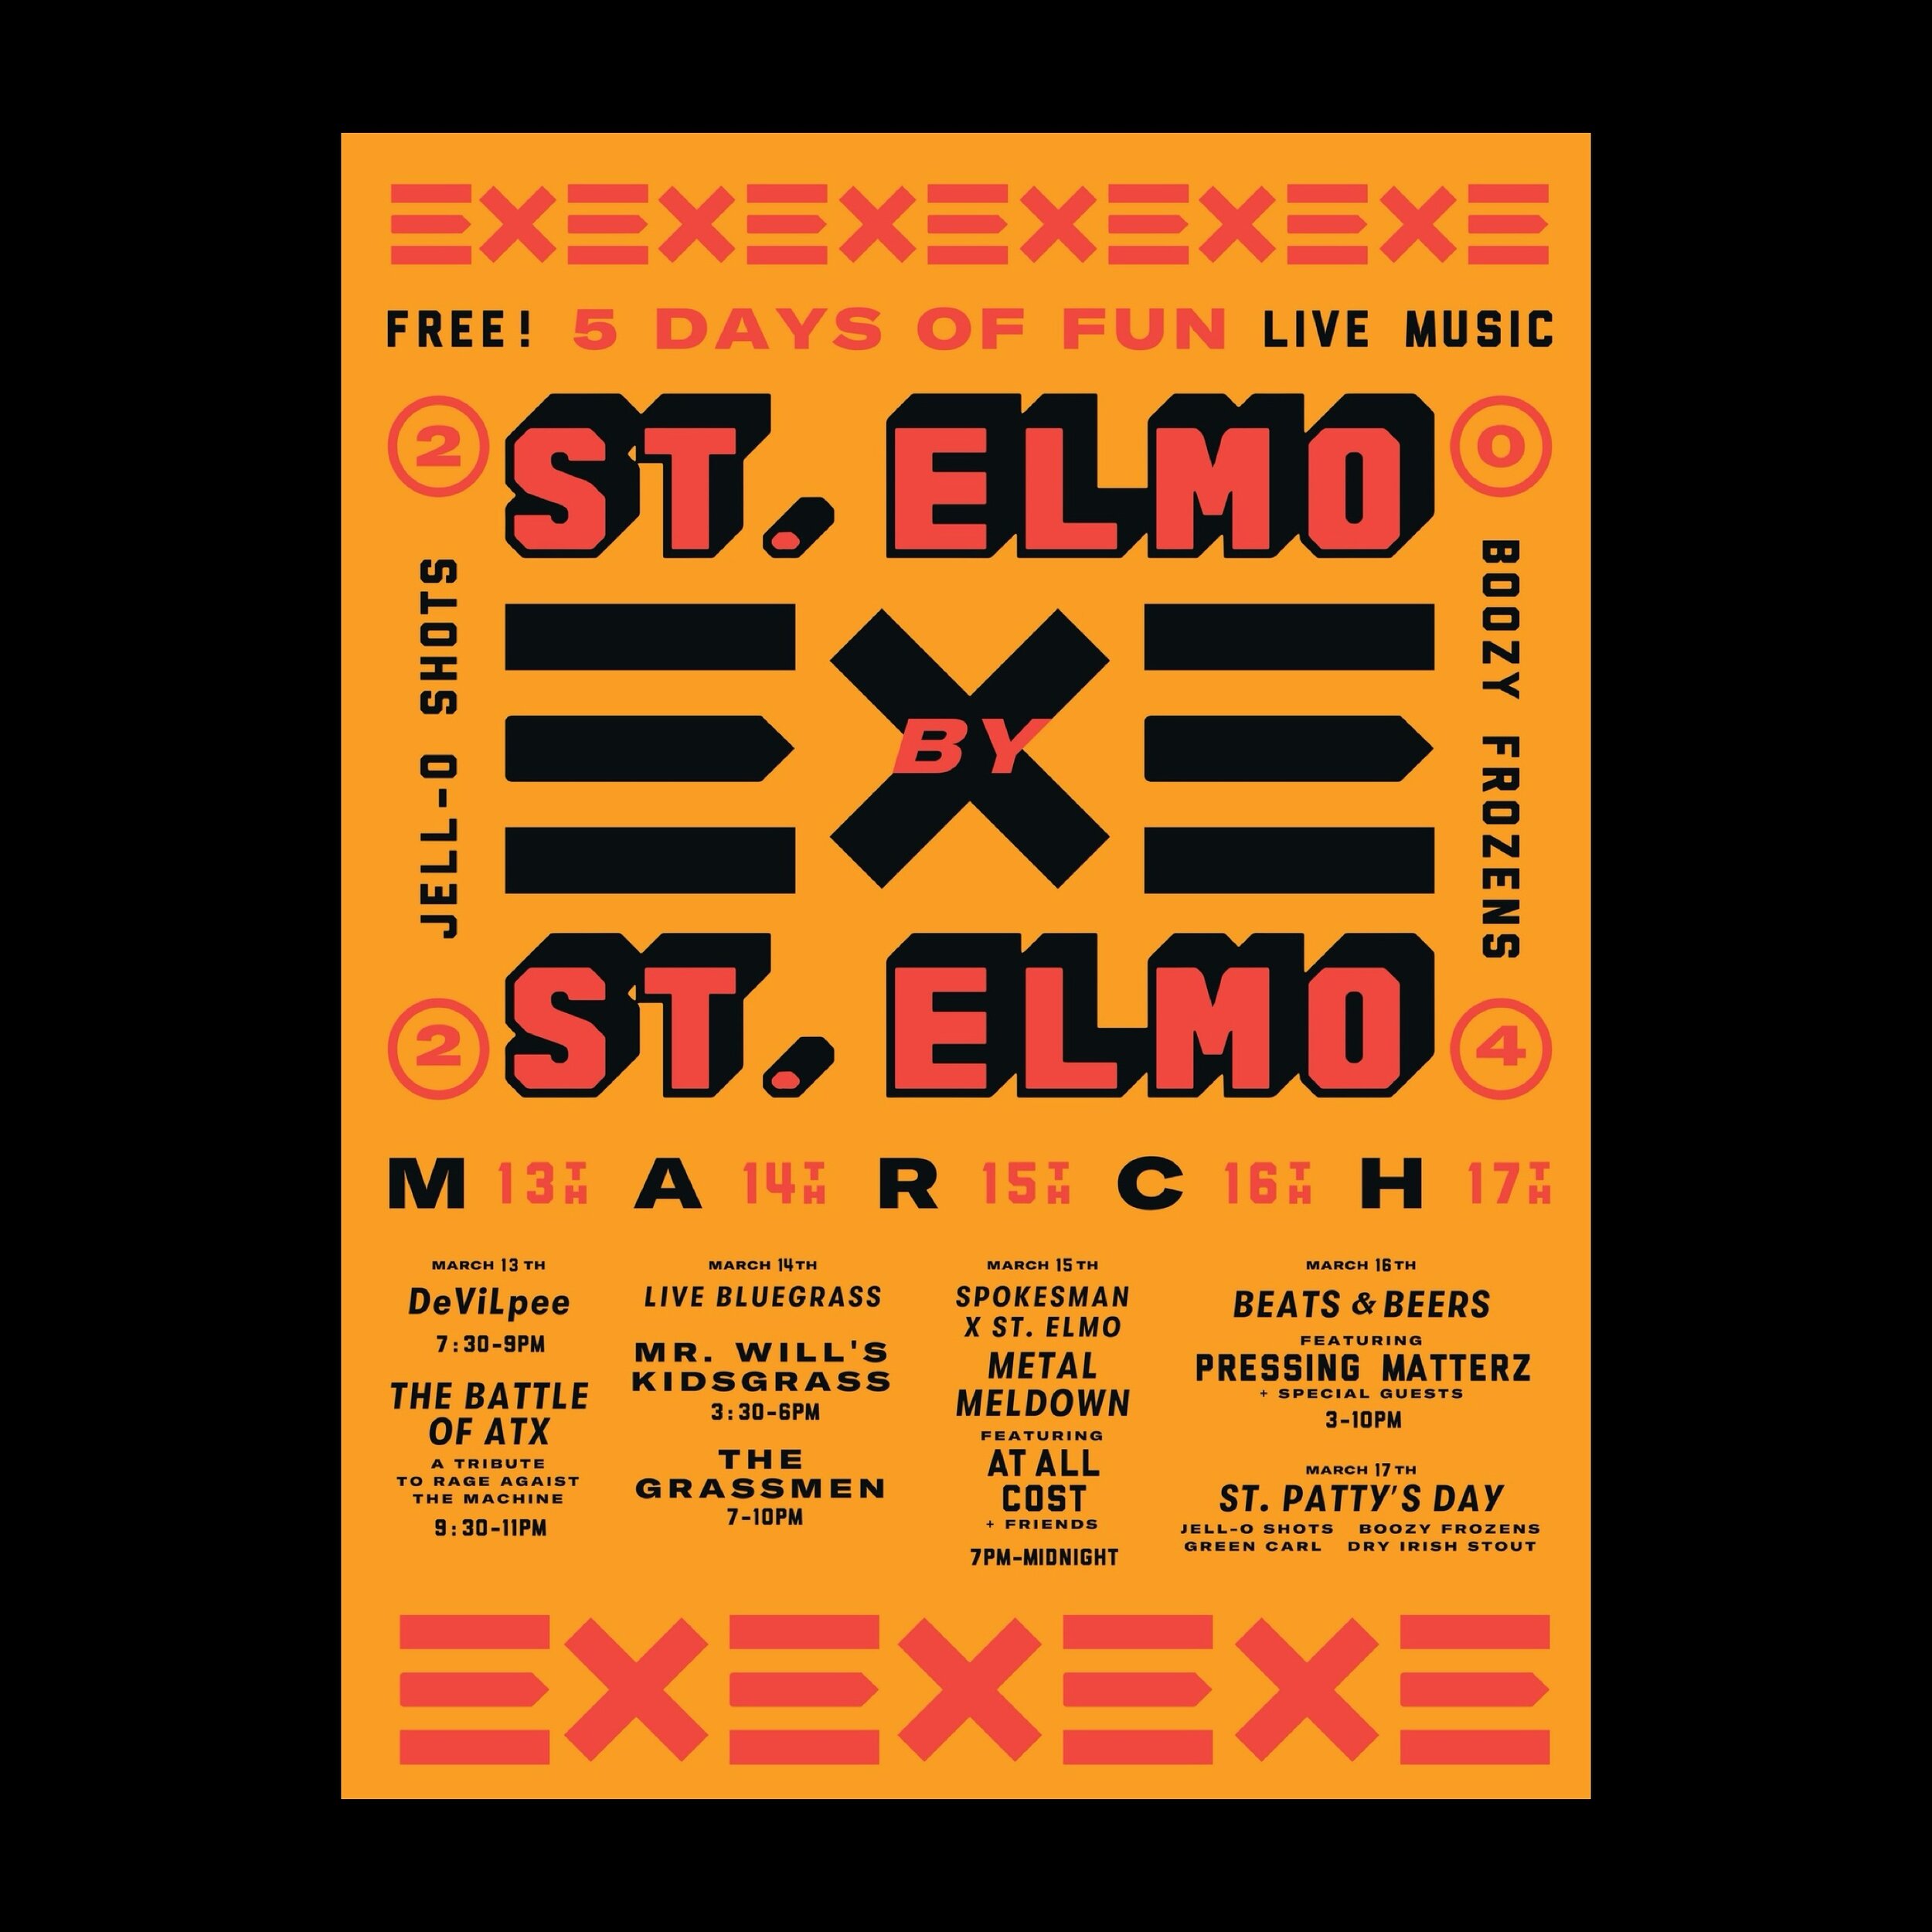 ❌❌ST ELMO X ST ELMO starts today❌❌

Join us all week long for free, live shows in the beer garden and taproom. 

Plus jello-shots, boozy frozens, n/a drinks, and lots of beer. @pattypalacetx and @spicyboyschicken will be open!

⁣
😈MARCH 13:⁣
DeViLpe